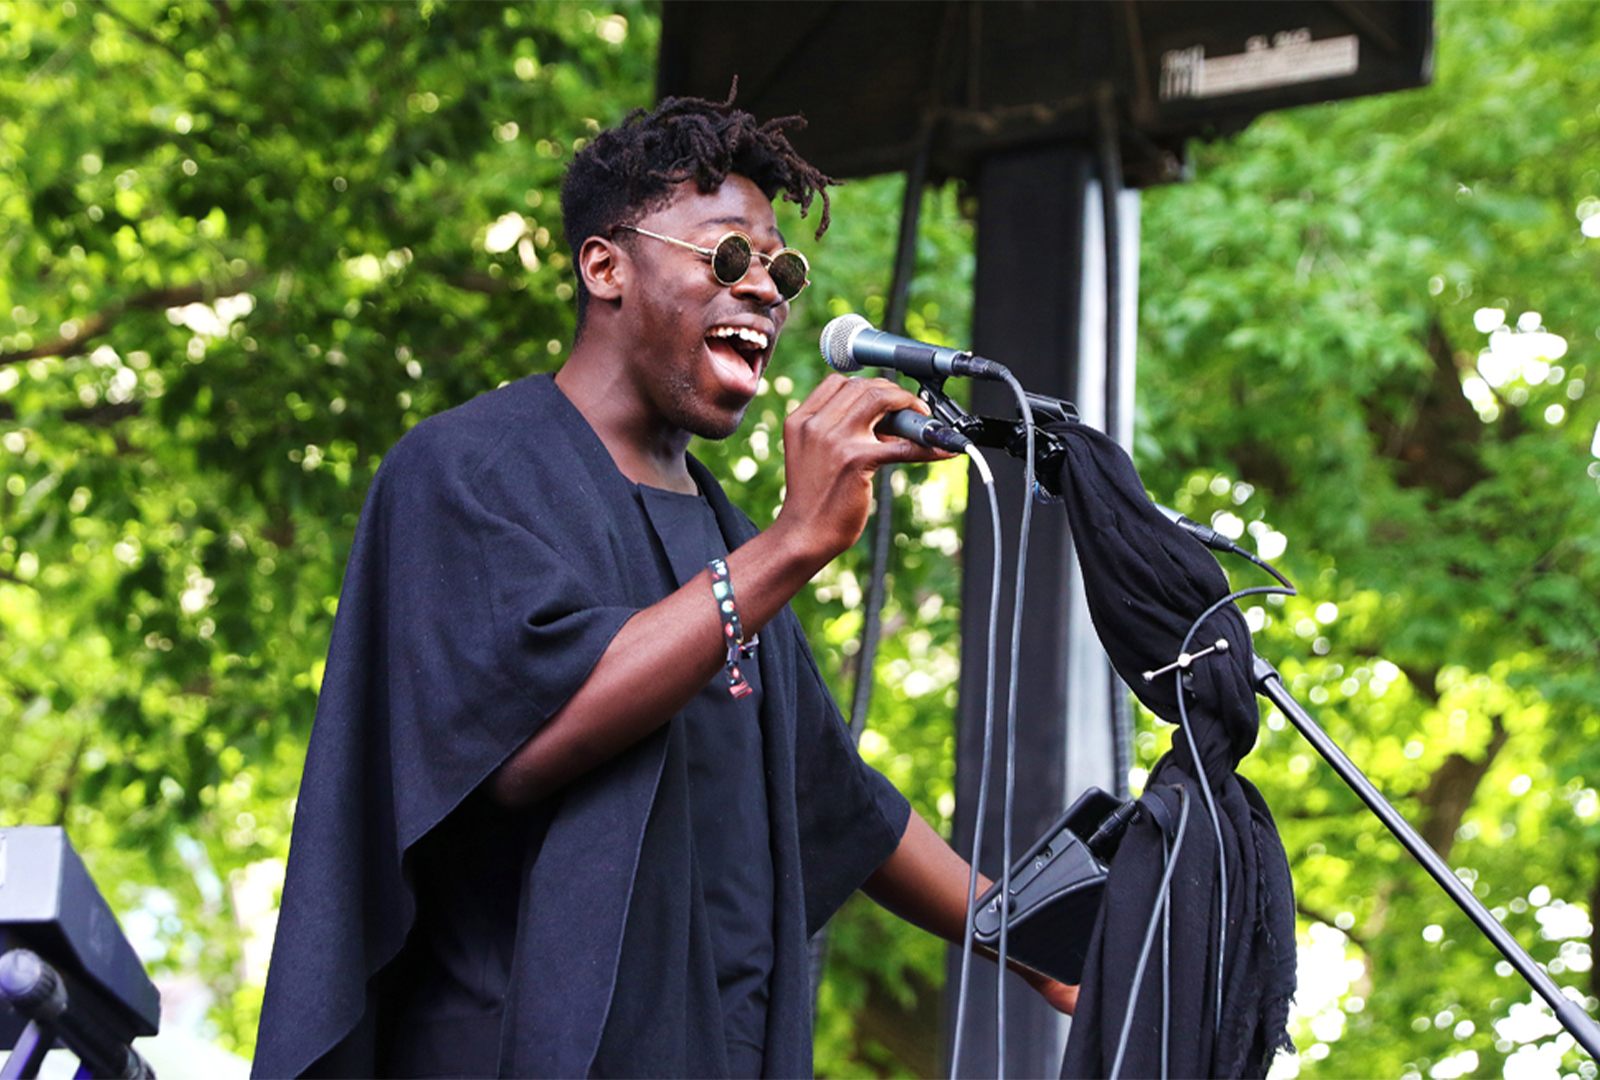 Moses Sumney: albums, songs, playlists